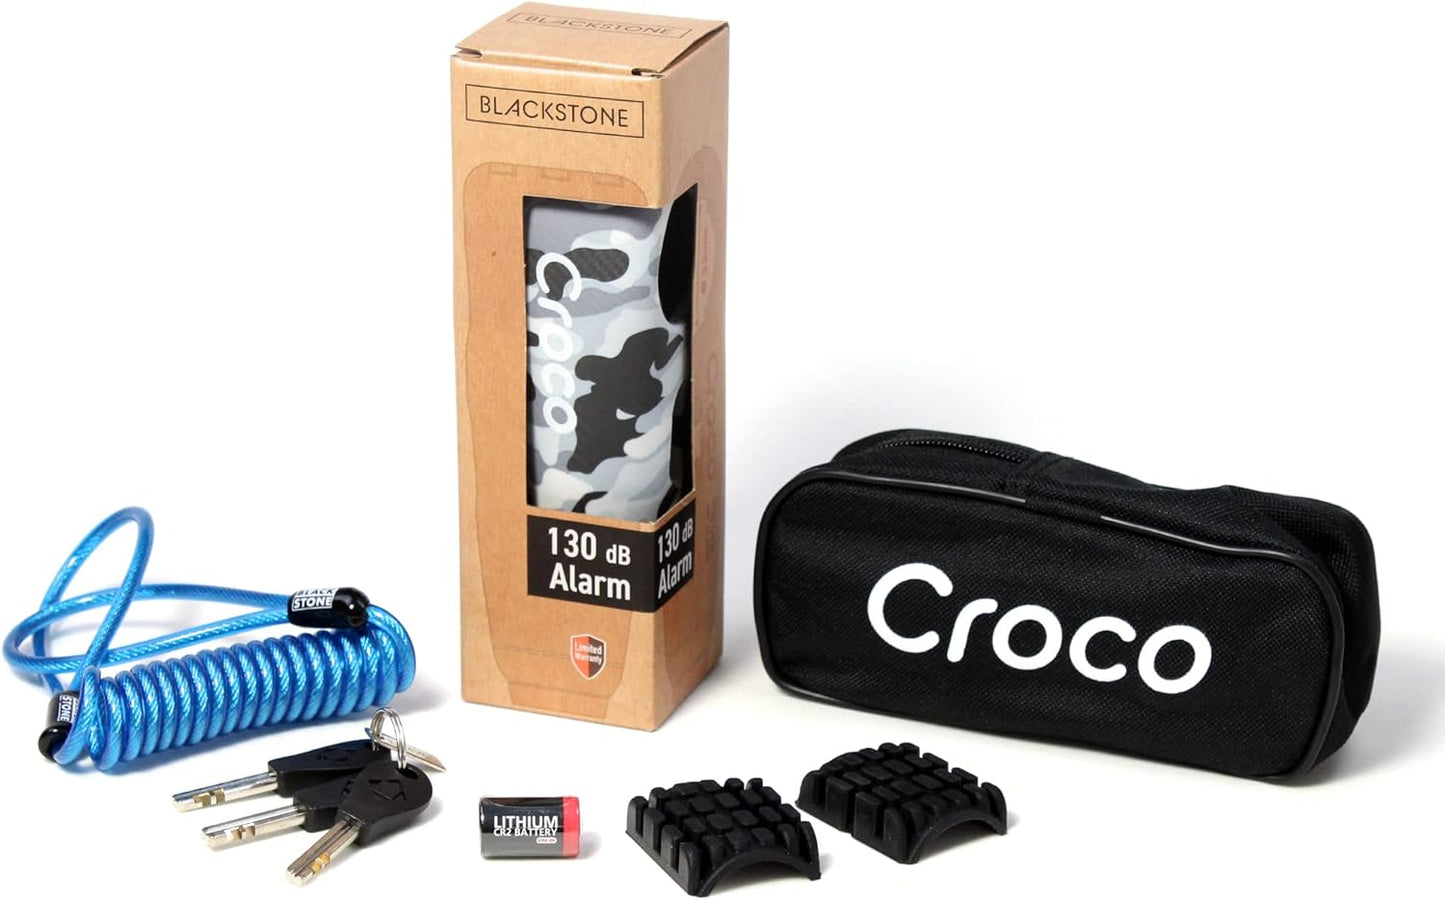 The image shows a product set which includes a Blackstone Croco alarm lock in its packaging, a Blue coiled cable, a black carrying pouch with the text "Croco" on it, three keys, a battery, and Two rubber pads for the lock, offering customization for various handlebar thicknesses or preferences. The items are neatly displayed, presumably for marketing or sales purposes